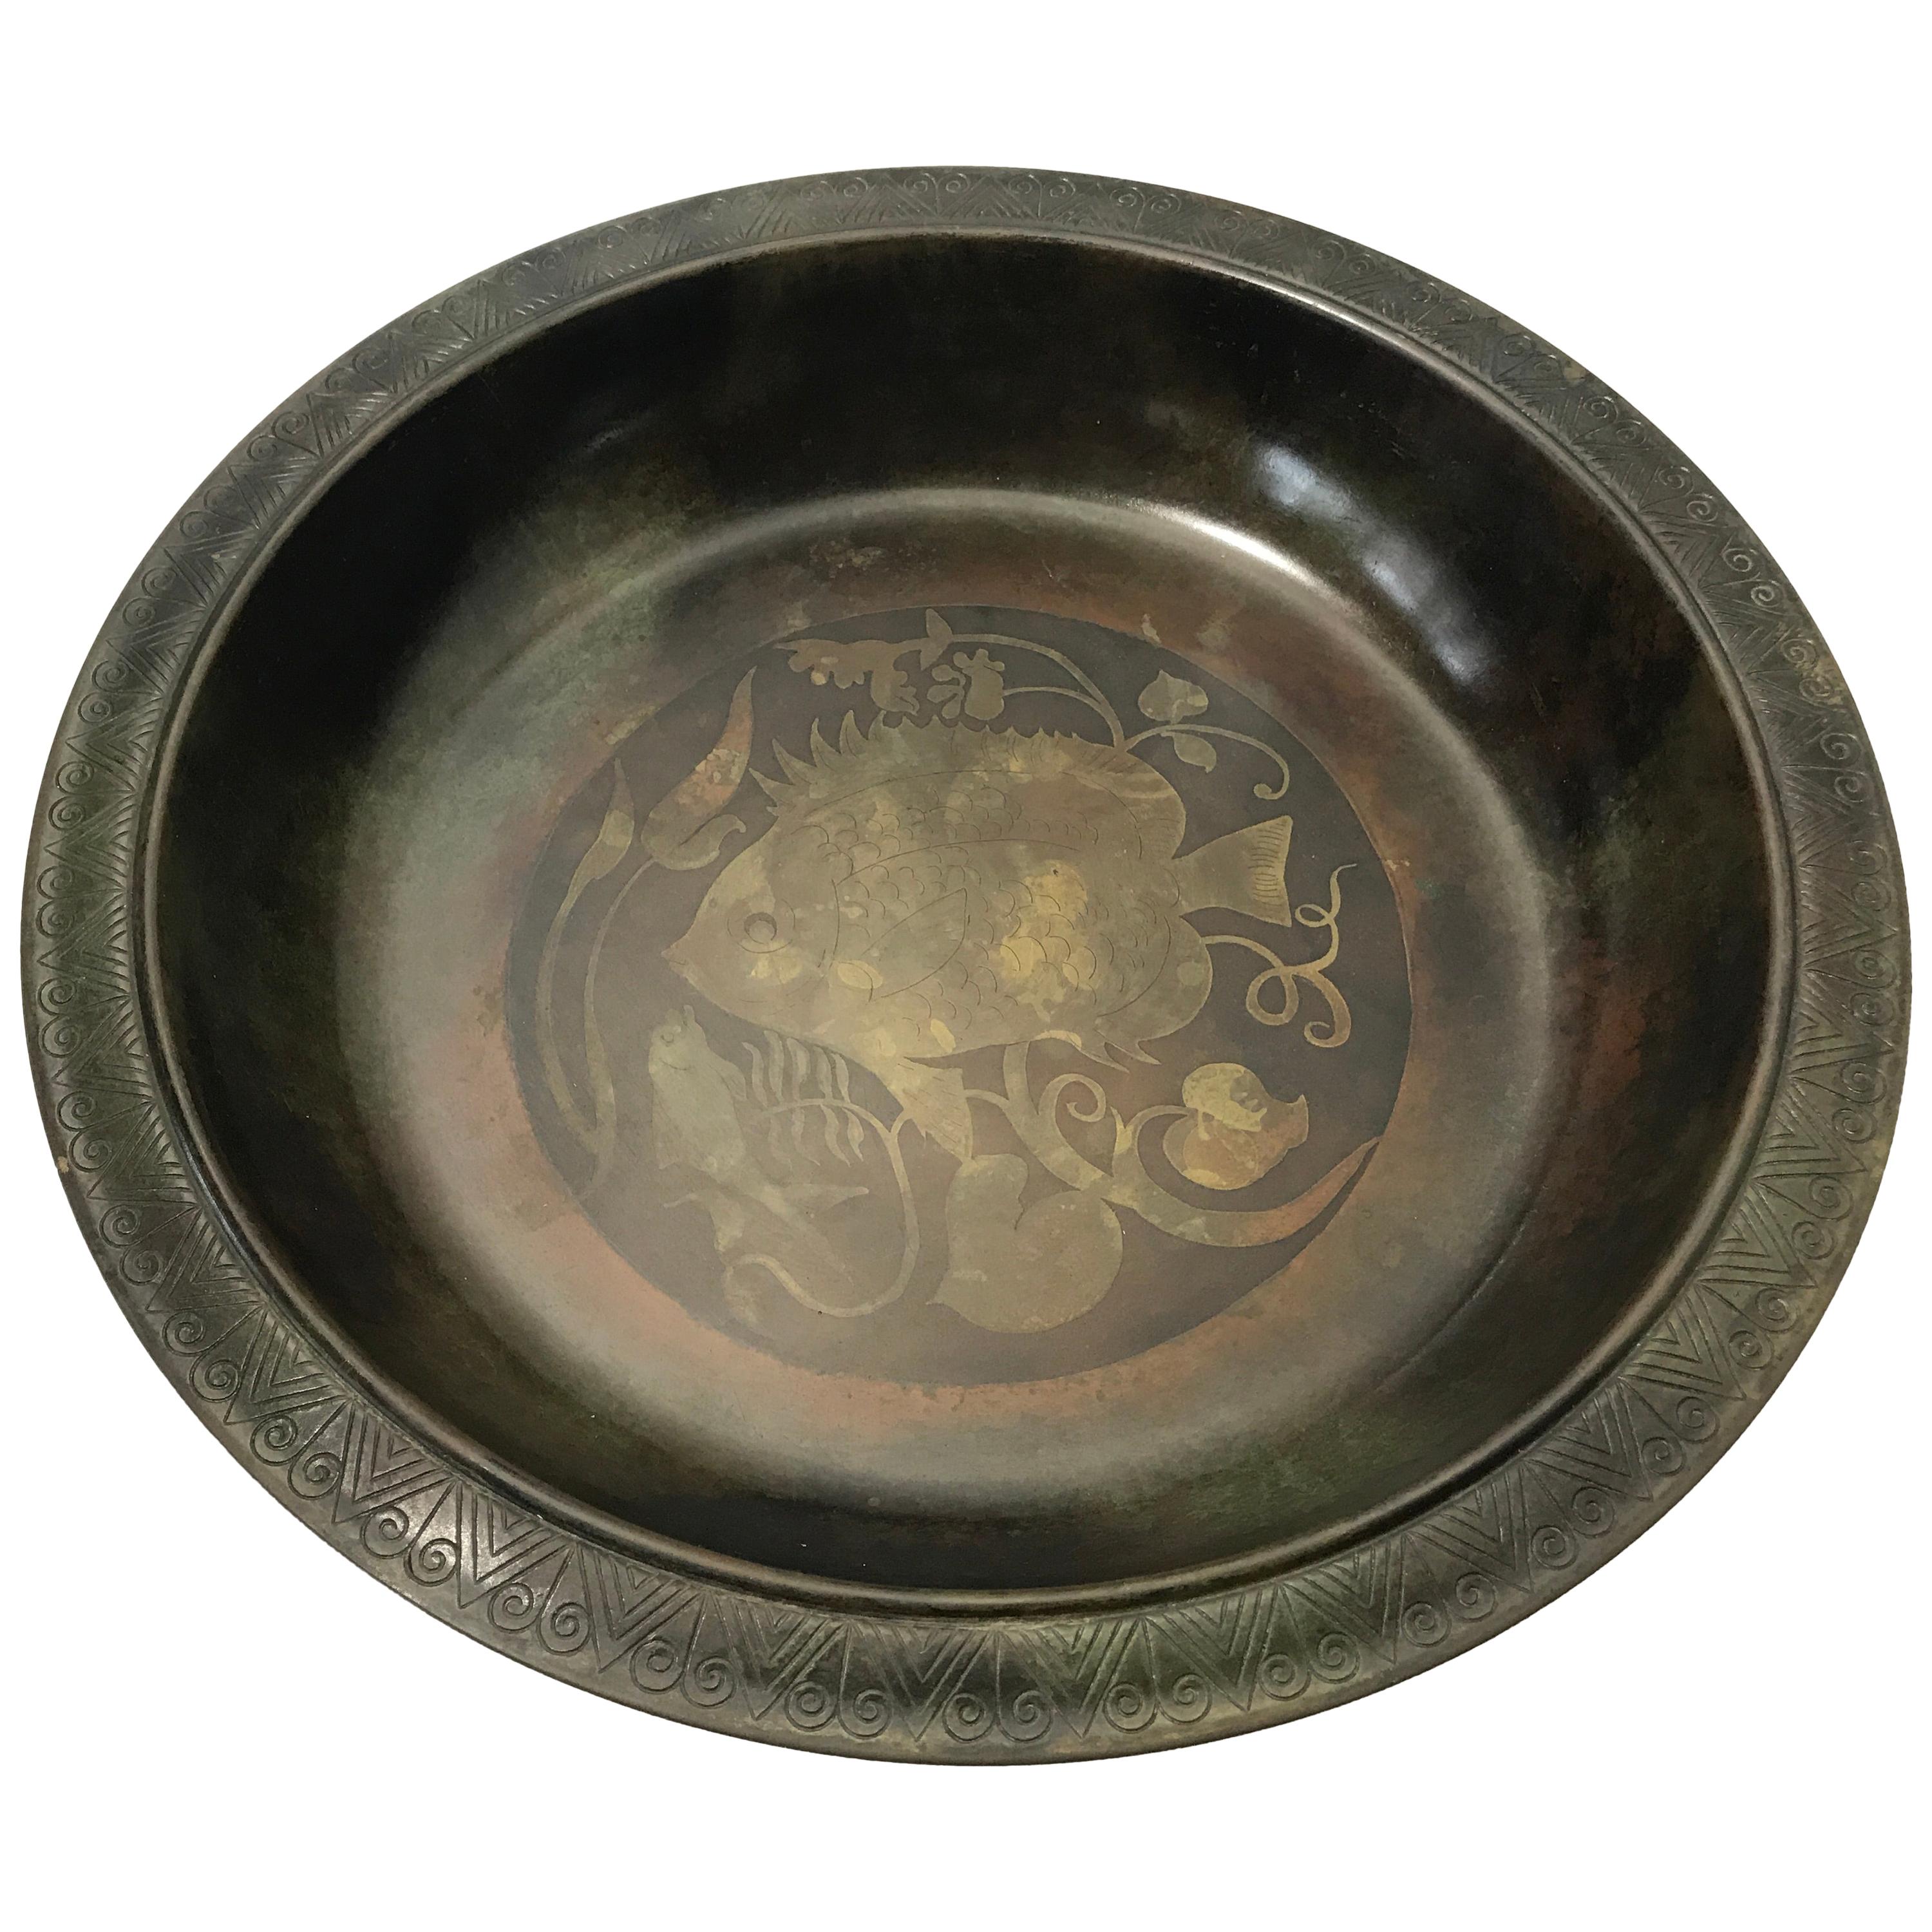 Just Andersen of Denmark patinated bronze bowl inlaid with two stylized fish surrounded by sea foliage. Engraved tooled edge to rim. Rich and aged patina,
circa 1930s.
A substantial piece of Just Andersen's fine work
Signed and numbered B52 to